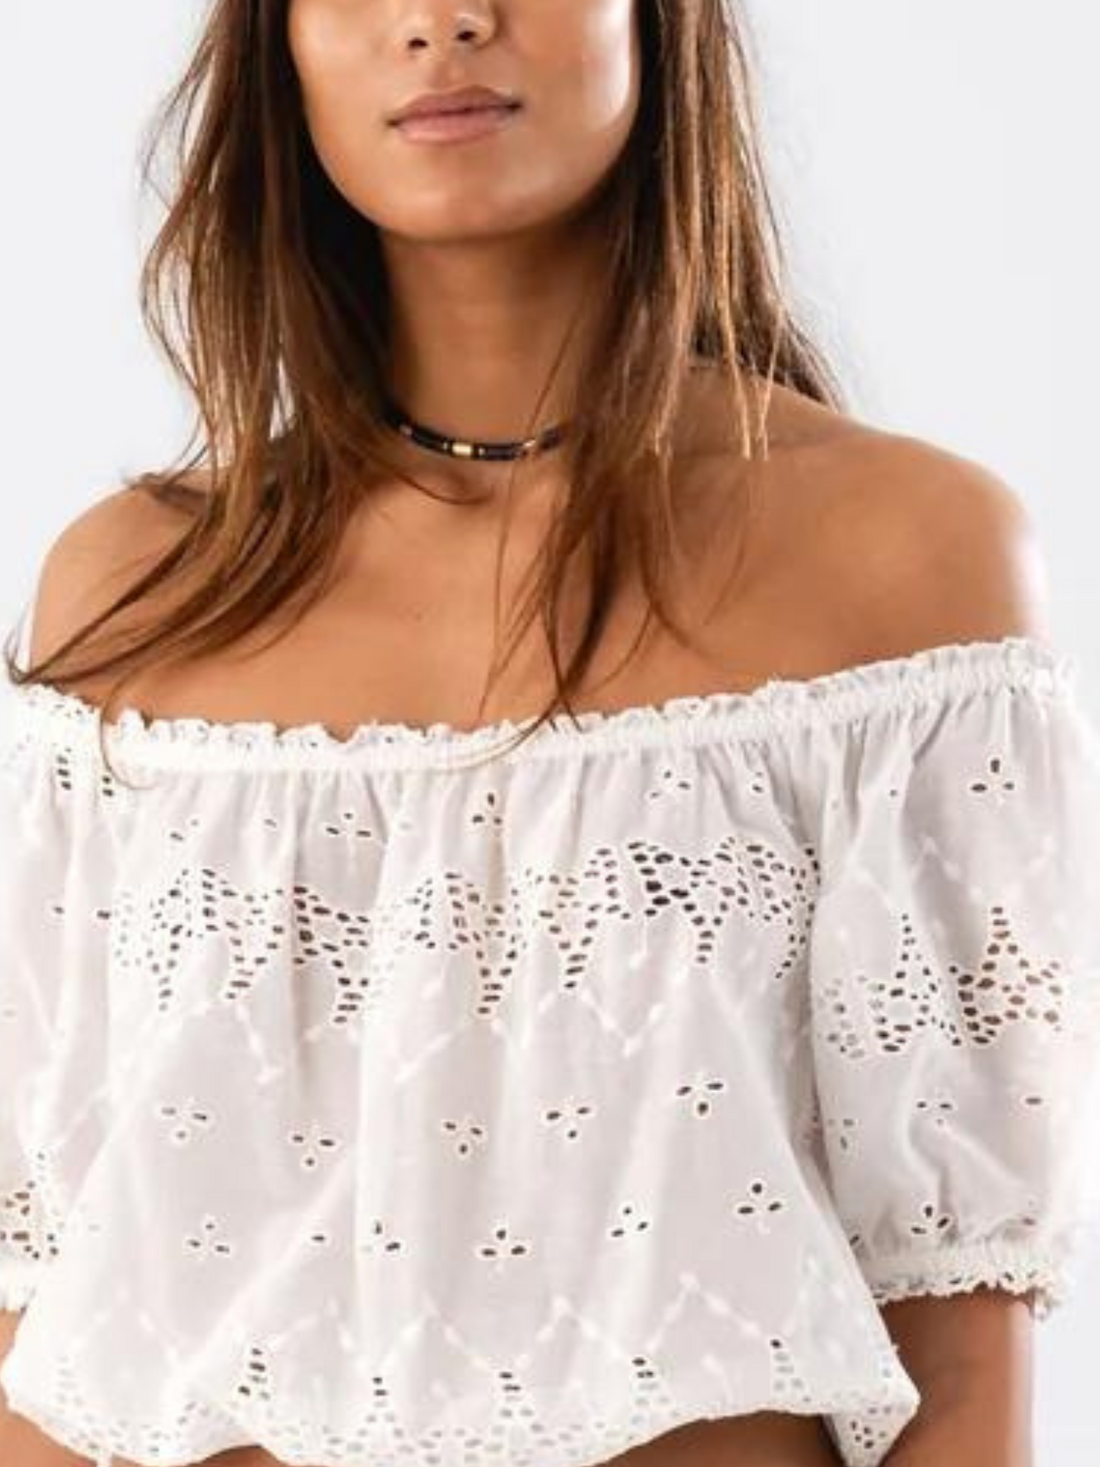 Krabill Crop Cotton broderie anglaise Top by Lollys Laundry at Jessimara.com,